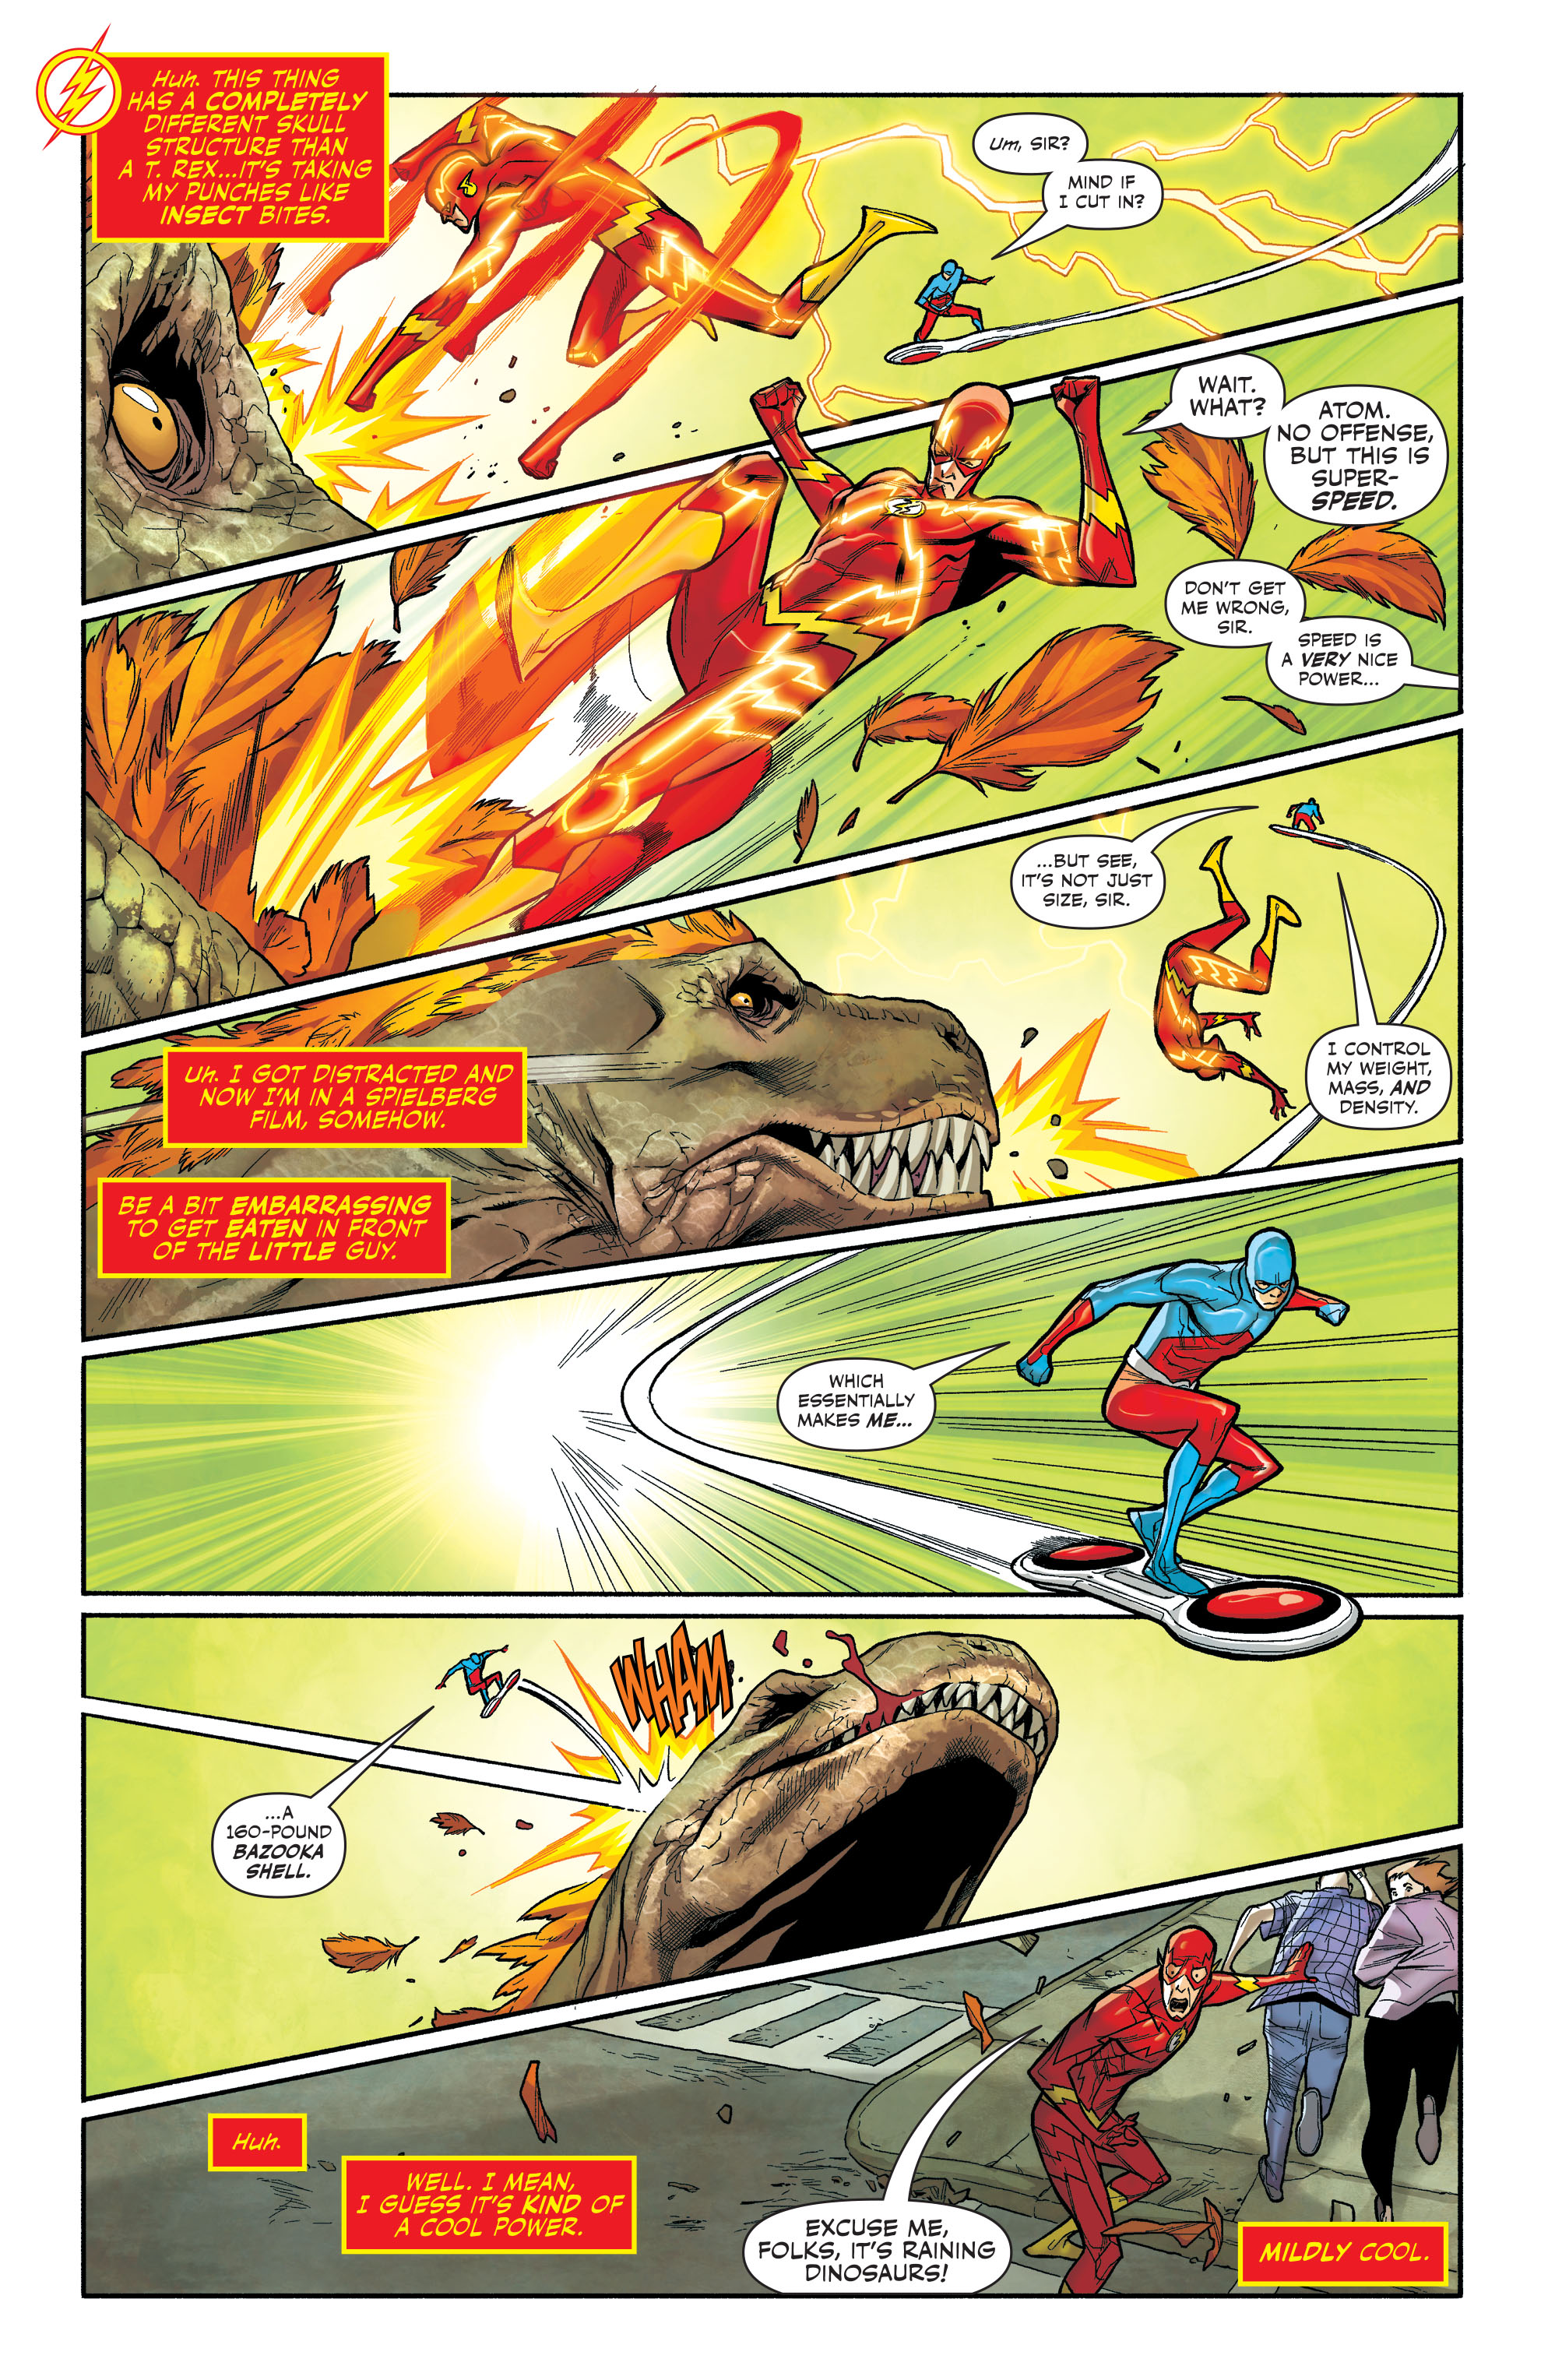 The Flash: Fastest Man Alive (2020-): Chapter 3 - Page 4